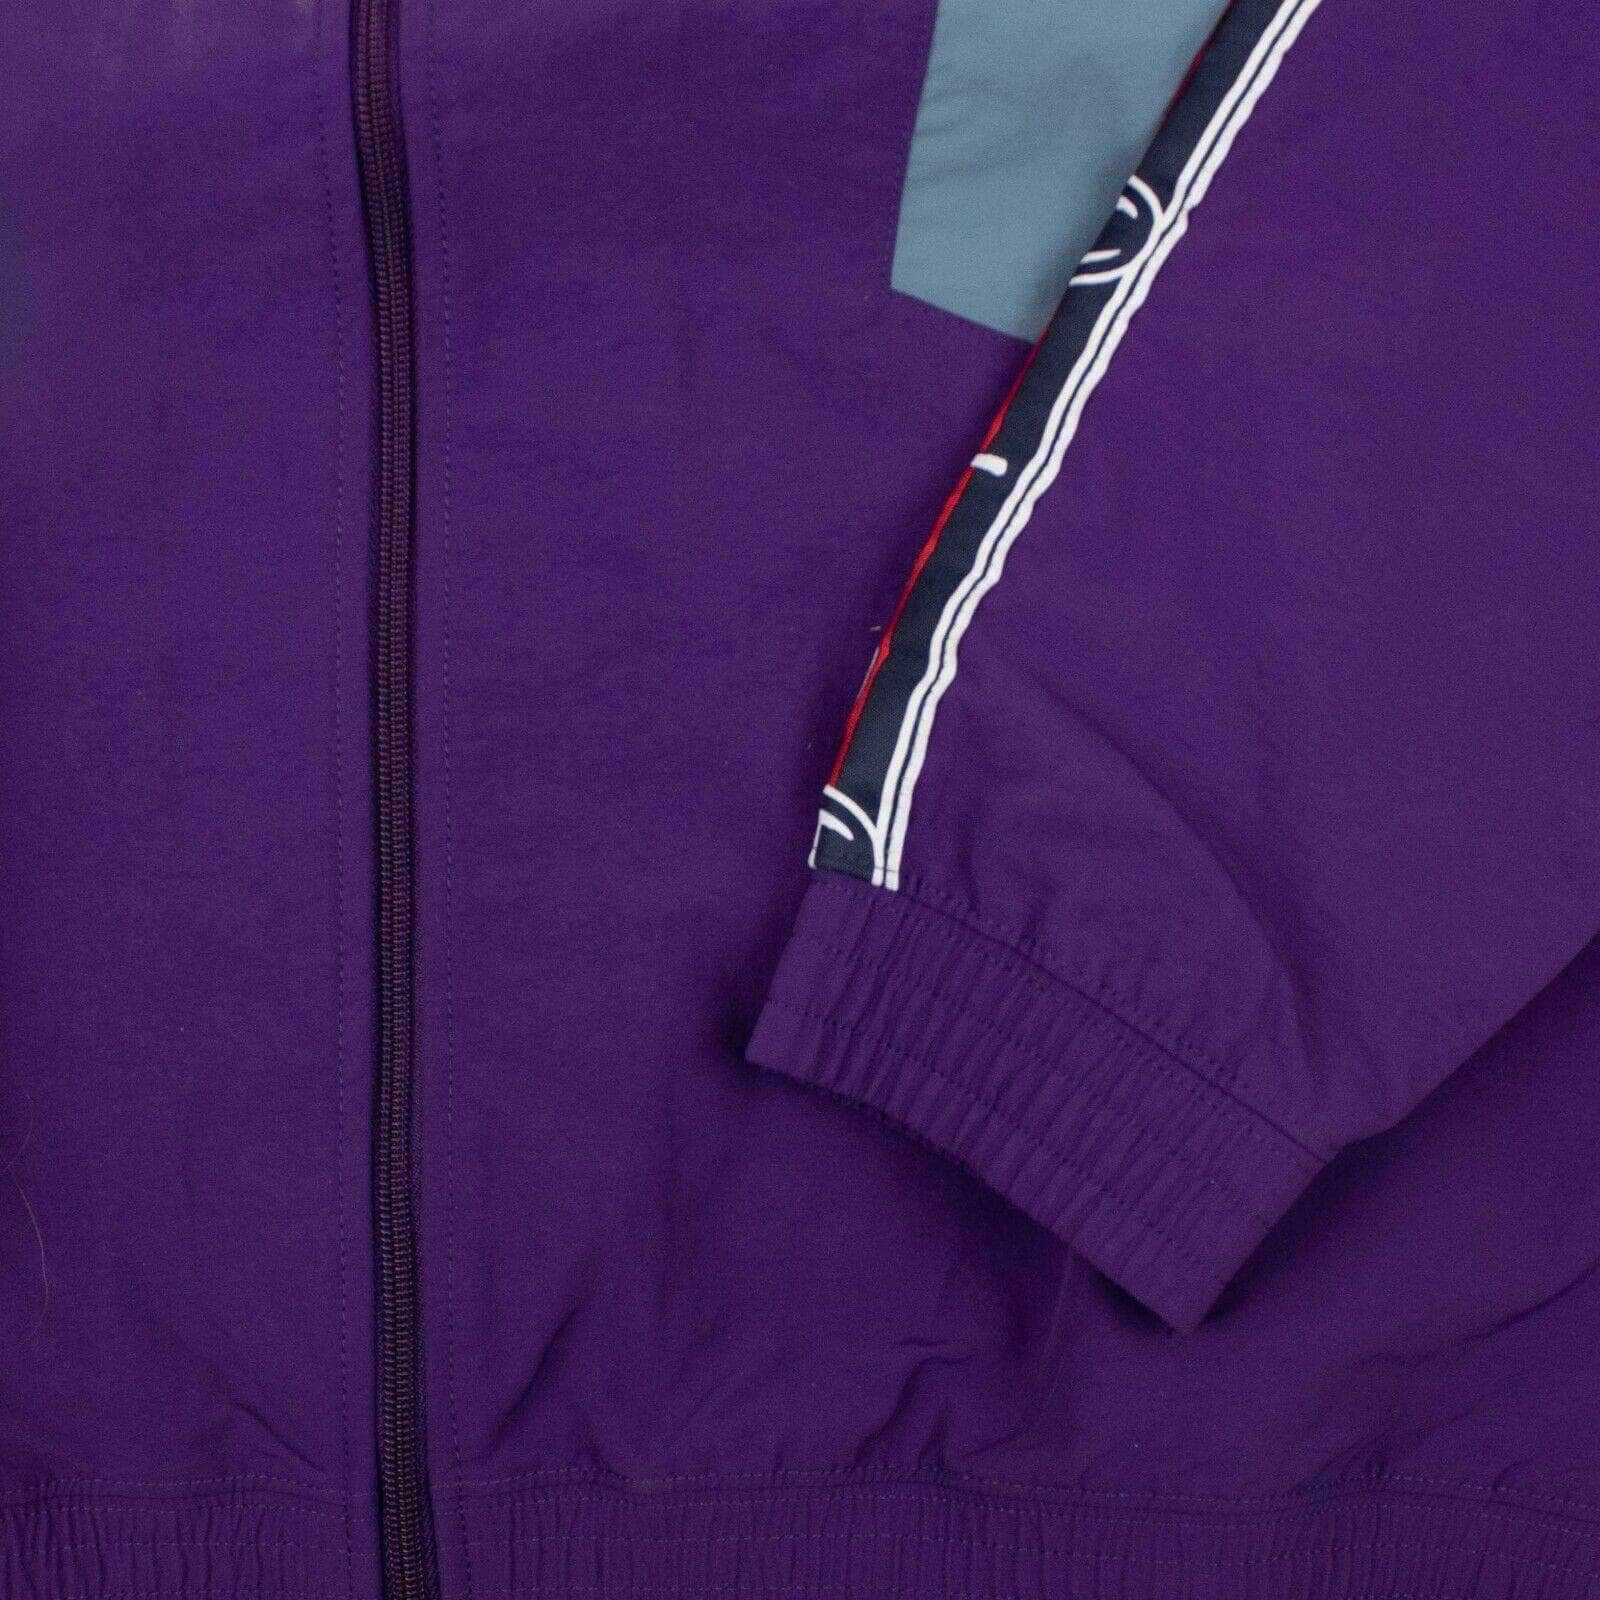 Champion champion, channelenable-all, chicmi, couponcollection, gender-mens, main-clothing, mens-shoes, mens-track-jackets, size-s, under-250 S Purple Zip Embroidered Track Top 95-CHP-1007/S 95-CHP-1007/S